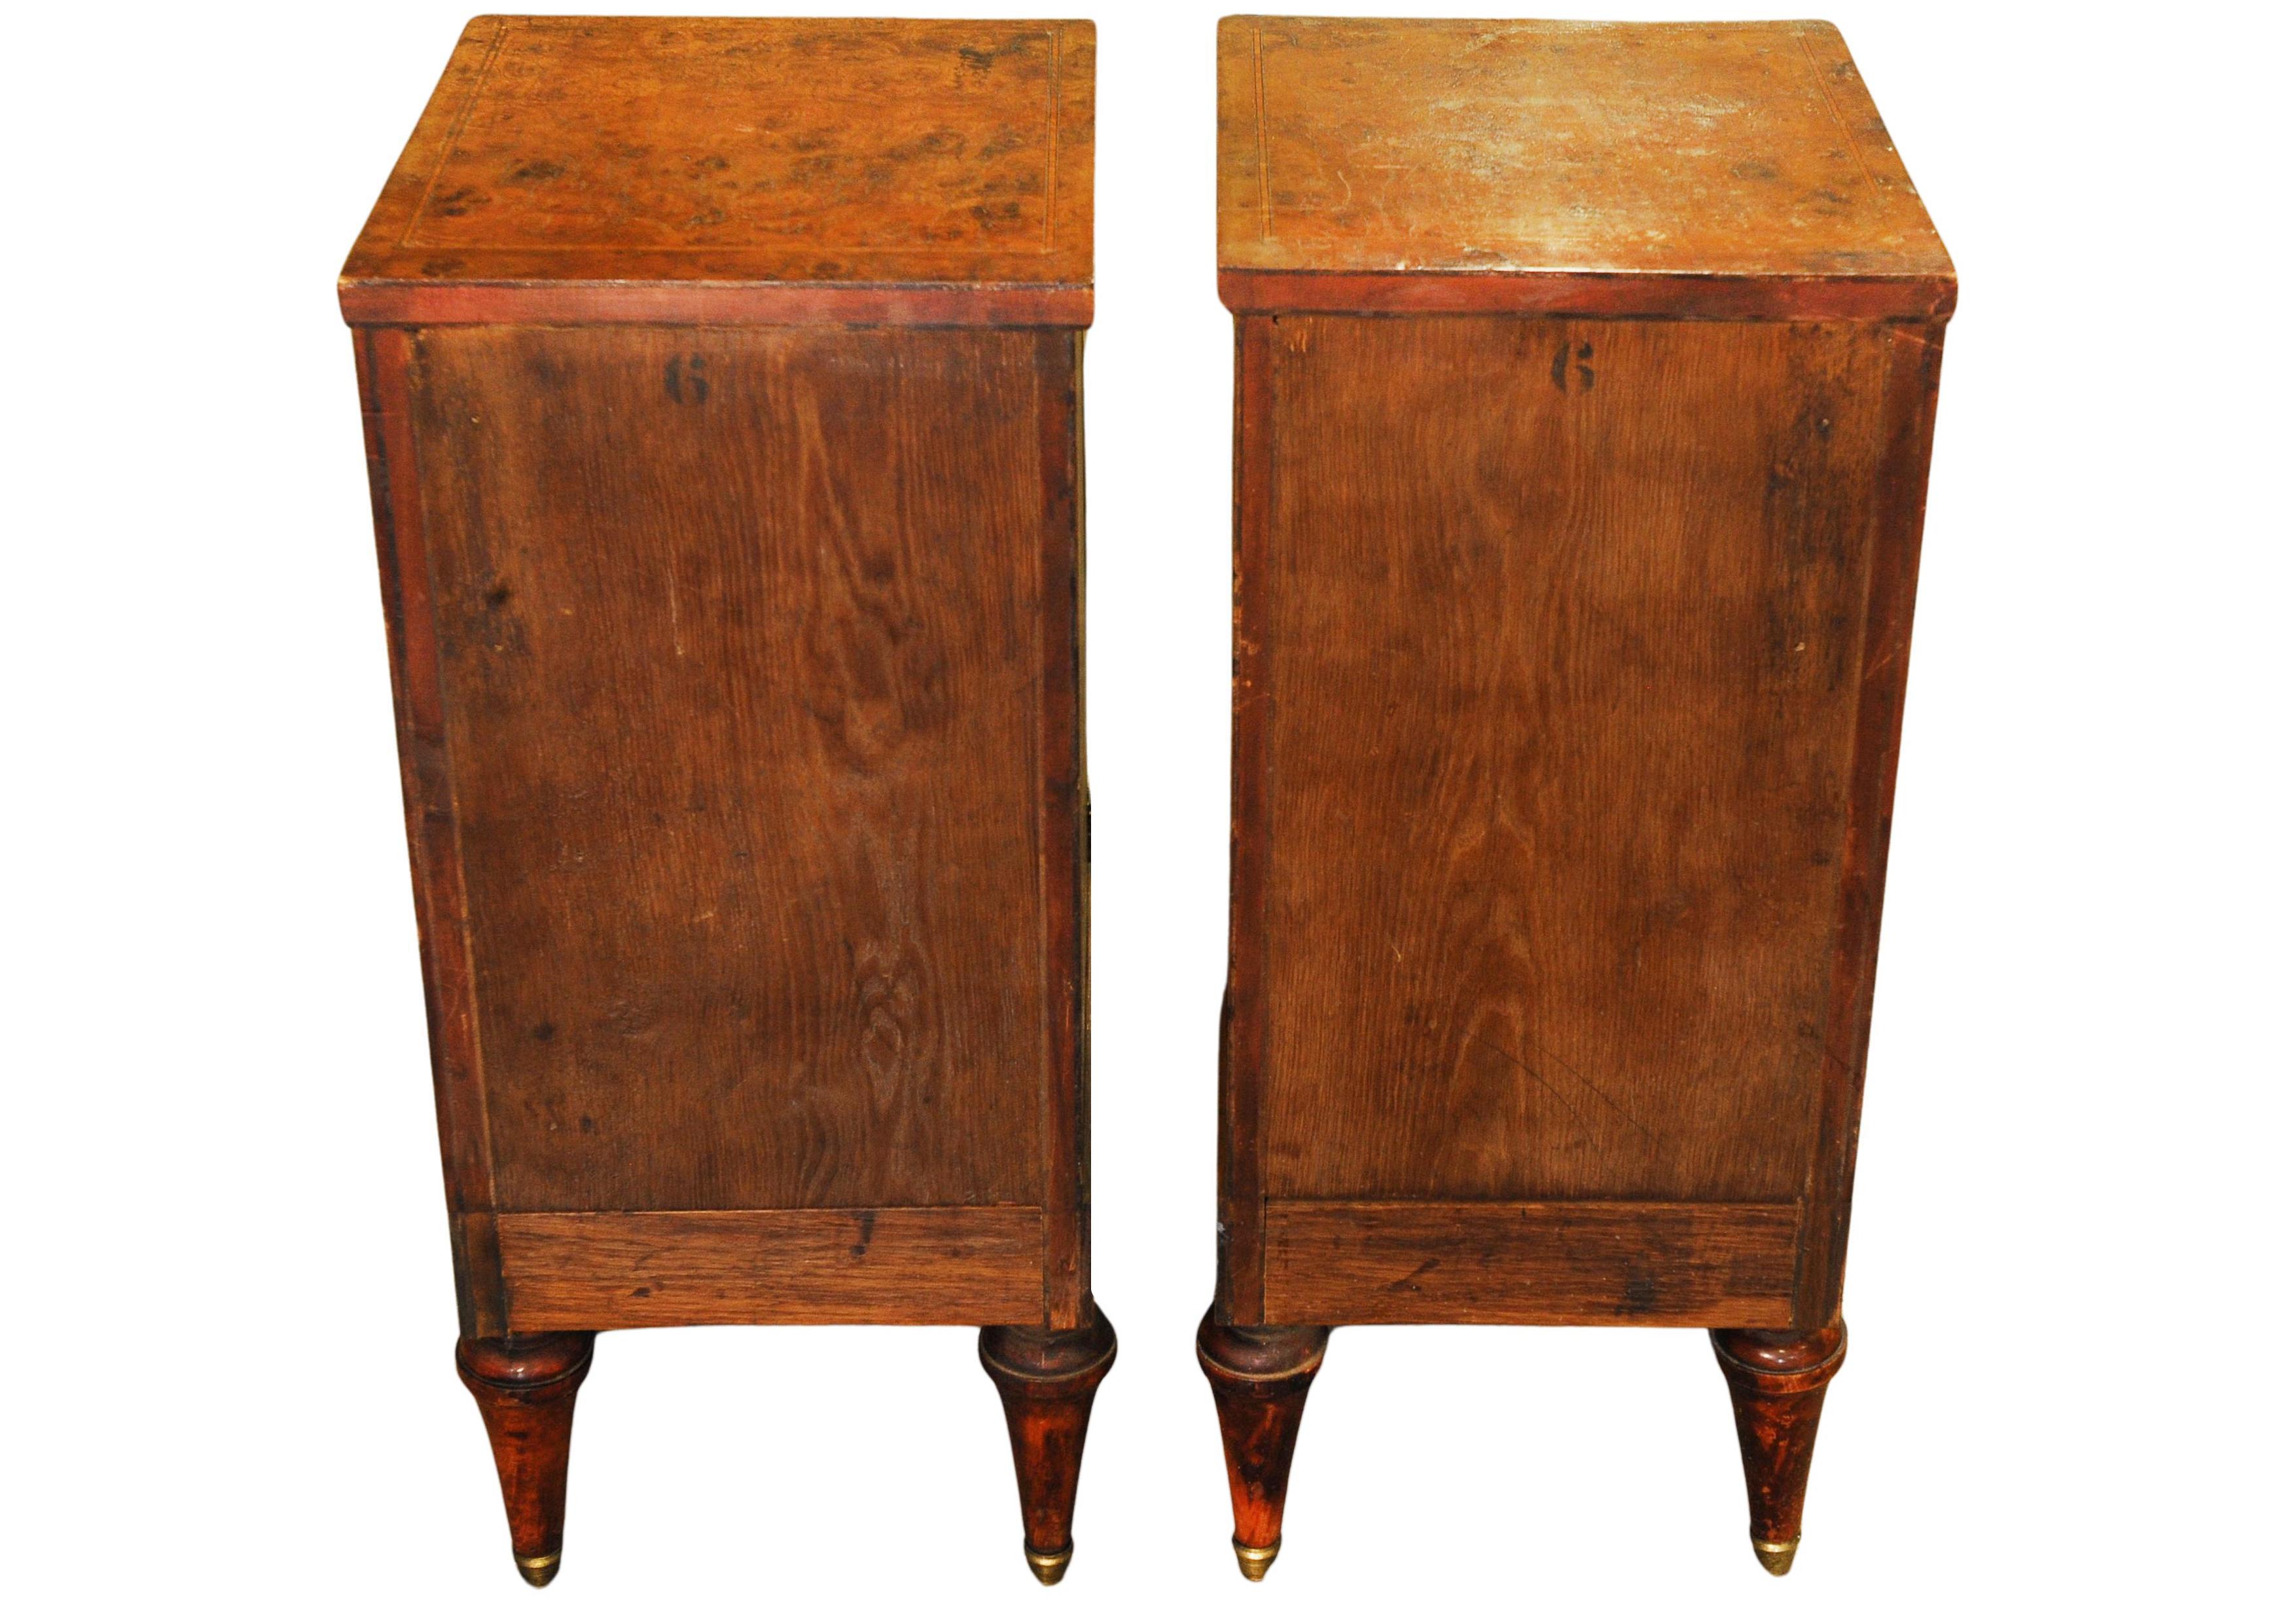 Exquisite Pair of French Empire Design Figured Walnut Three Drawer Nightstands For Sale 9